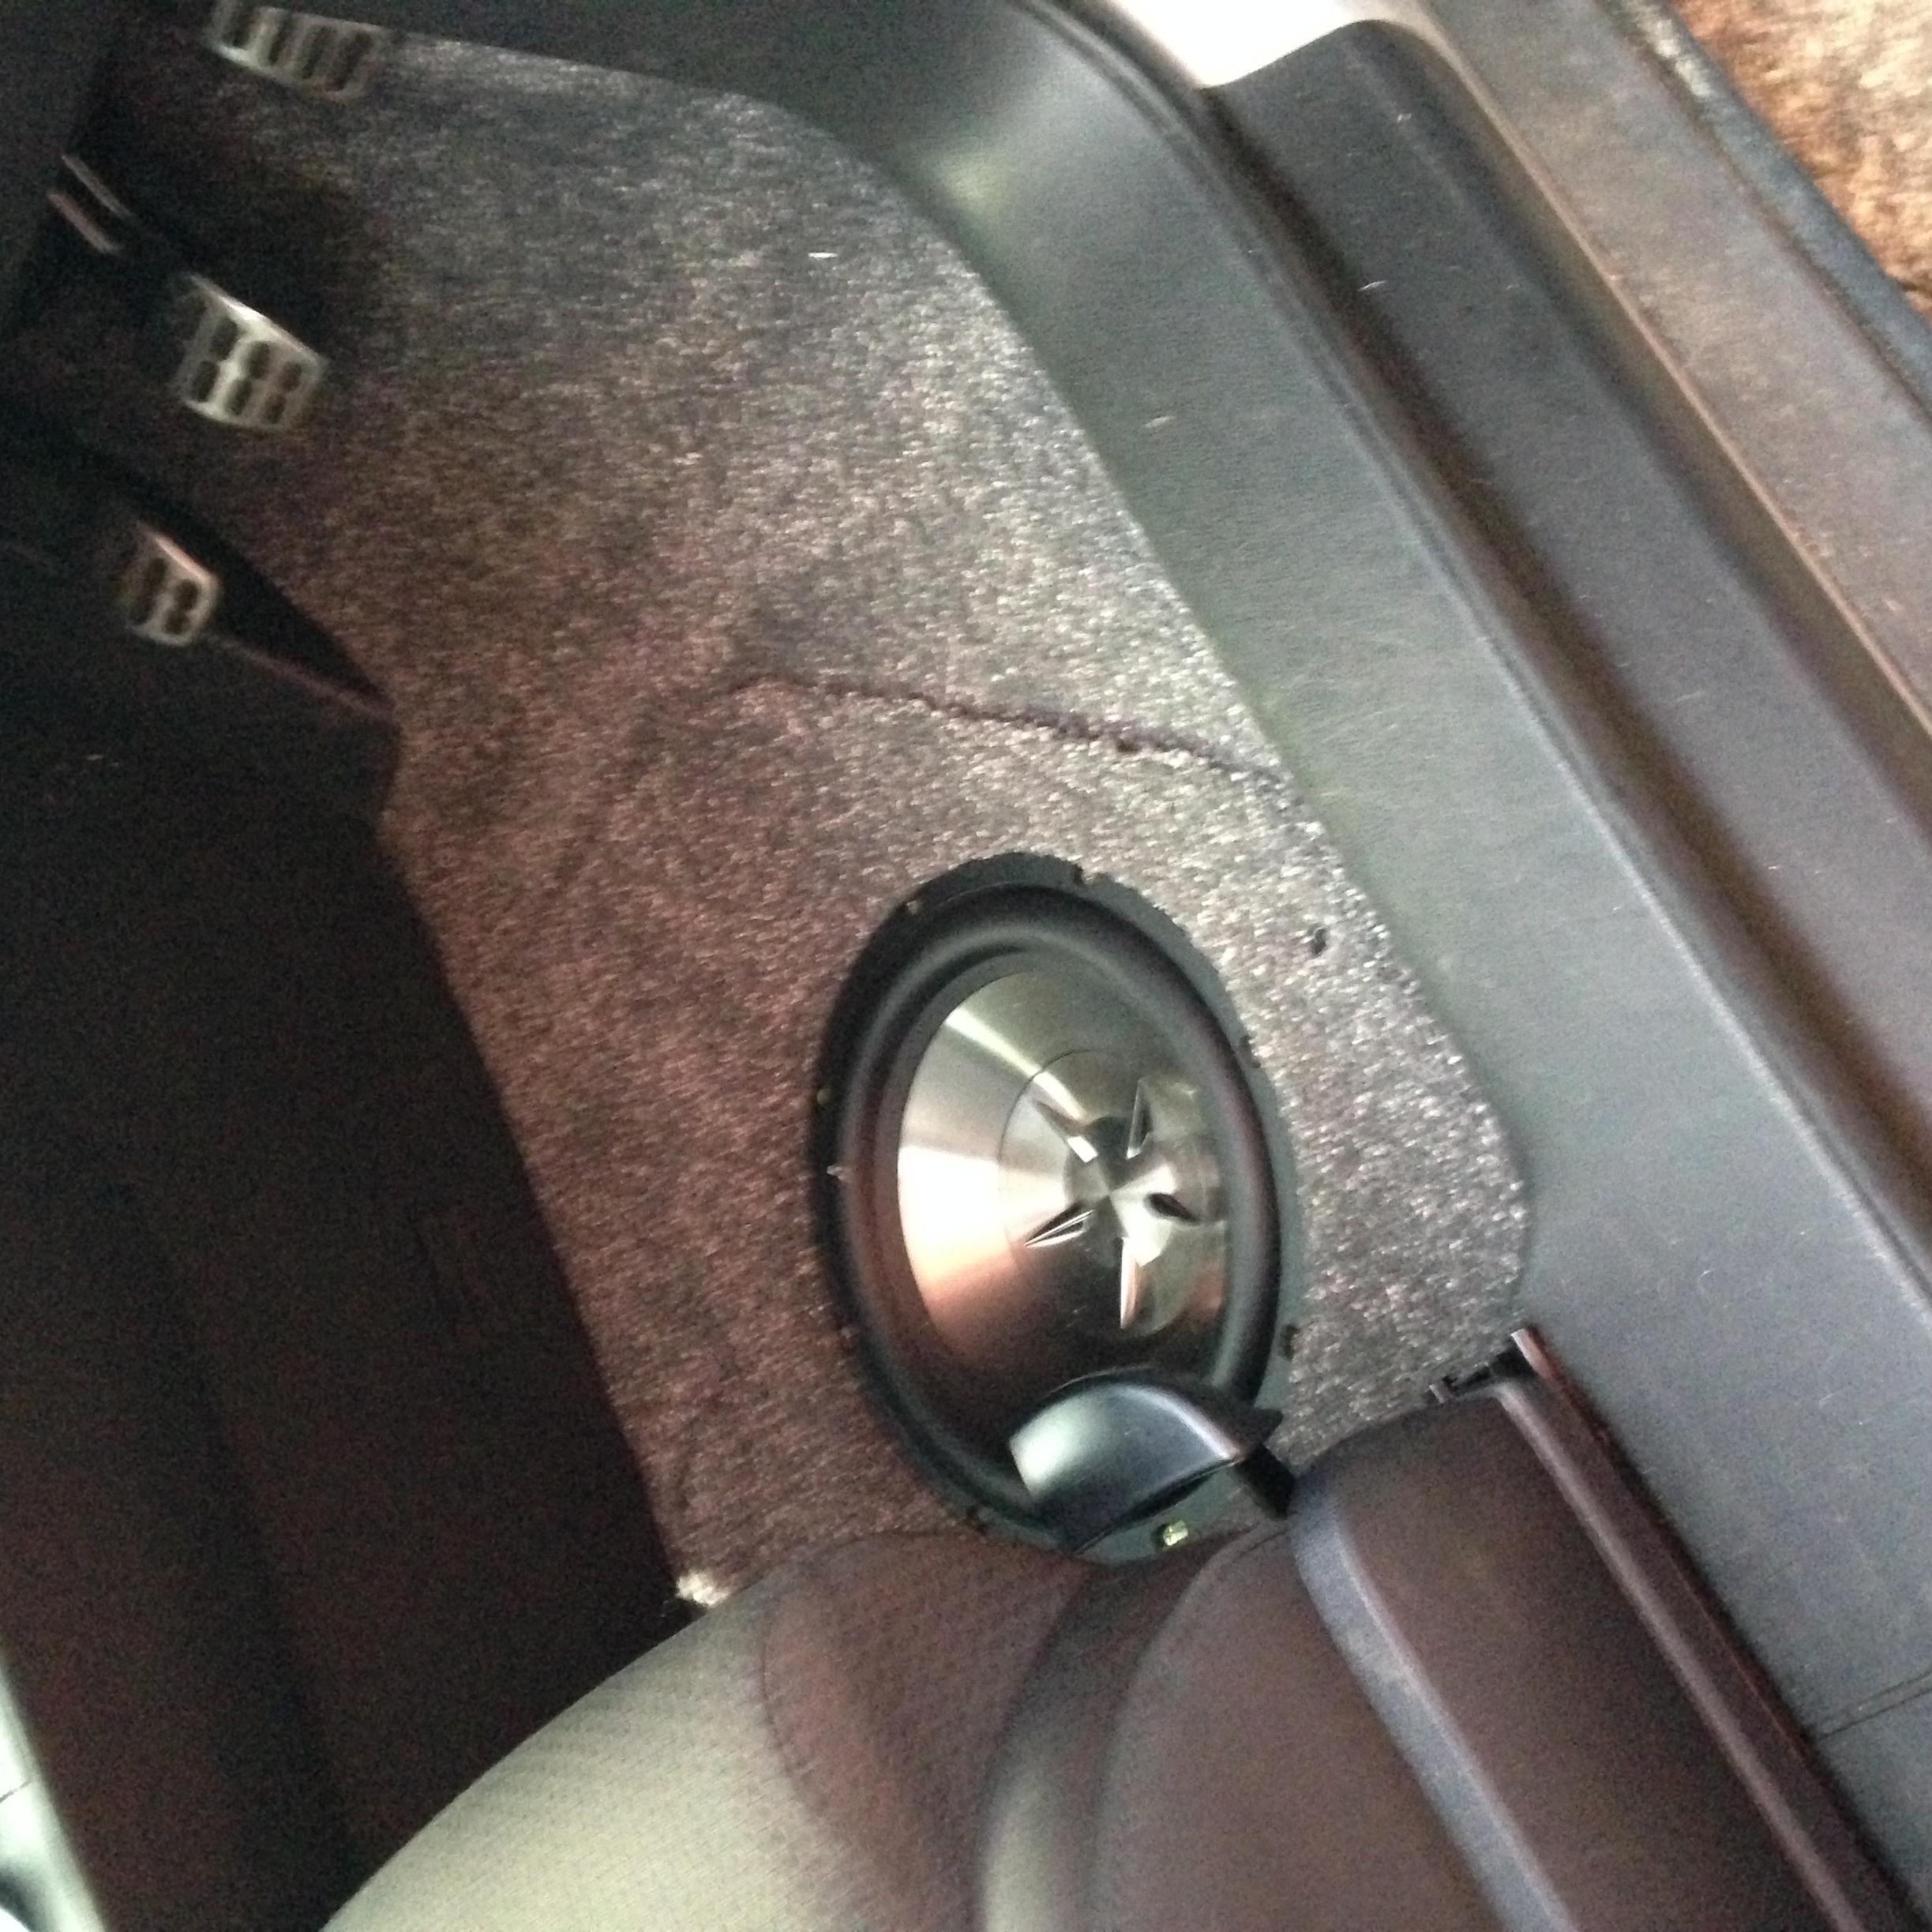 10" Sub in drivers side footwell